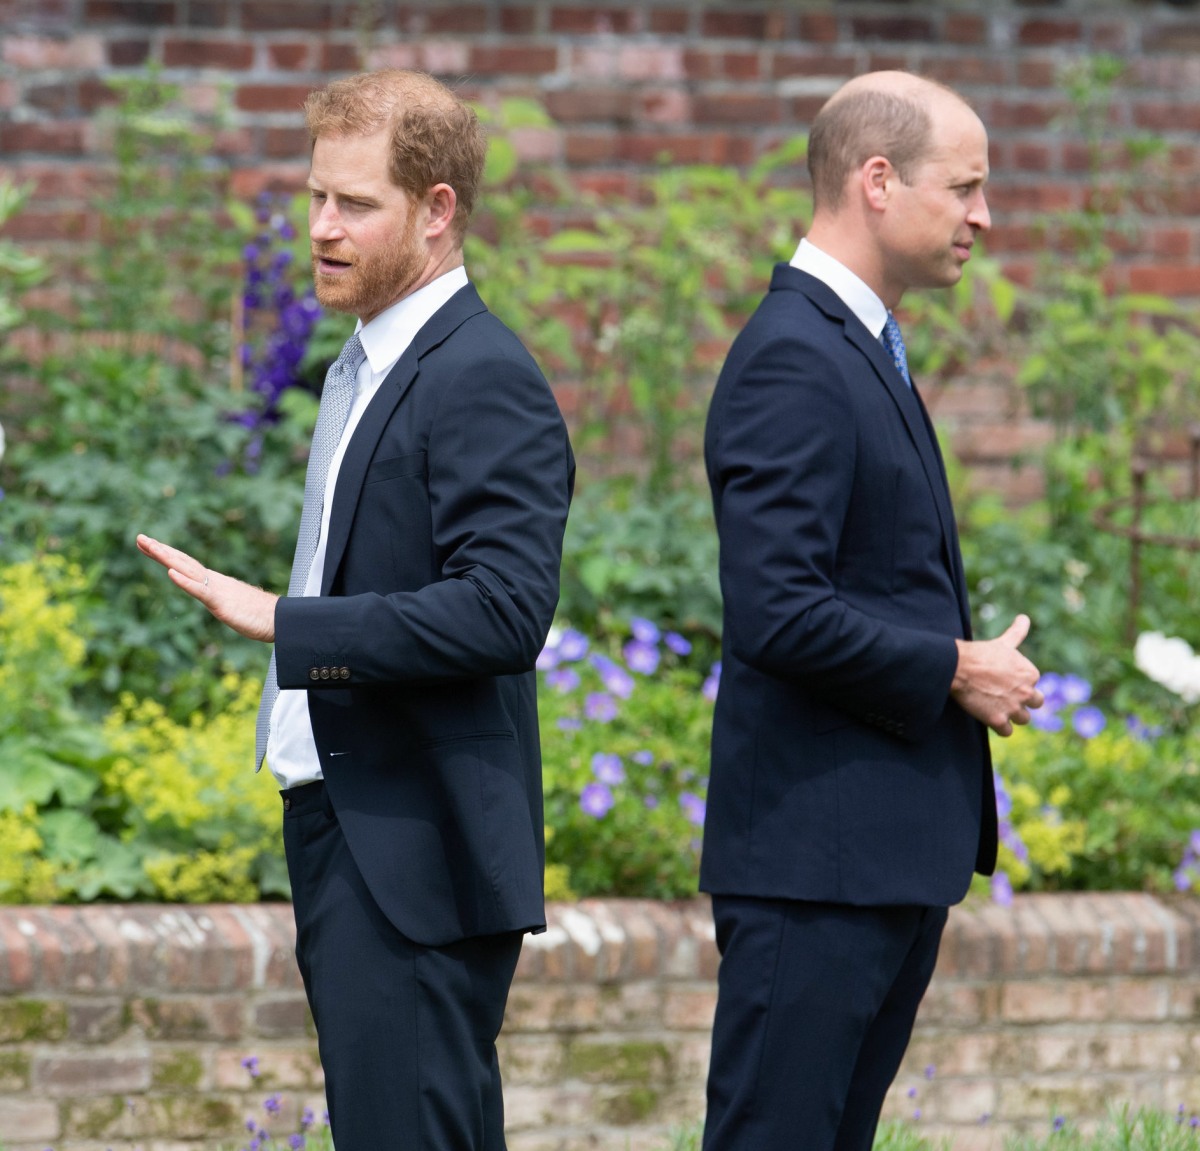 Prince William & Harry will no longer be patrons of their late friend’s memorial fund